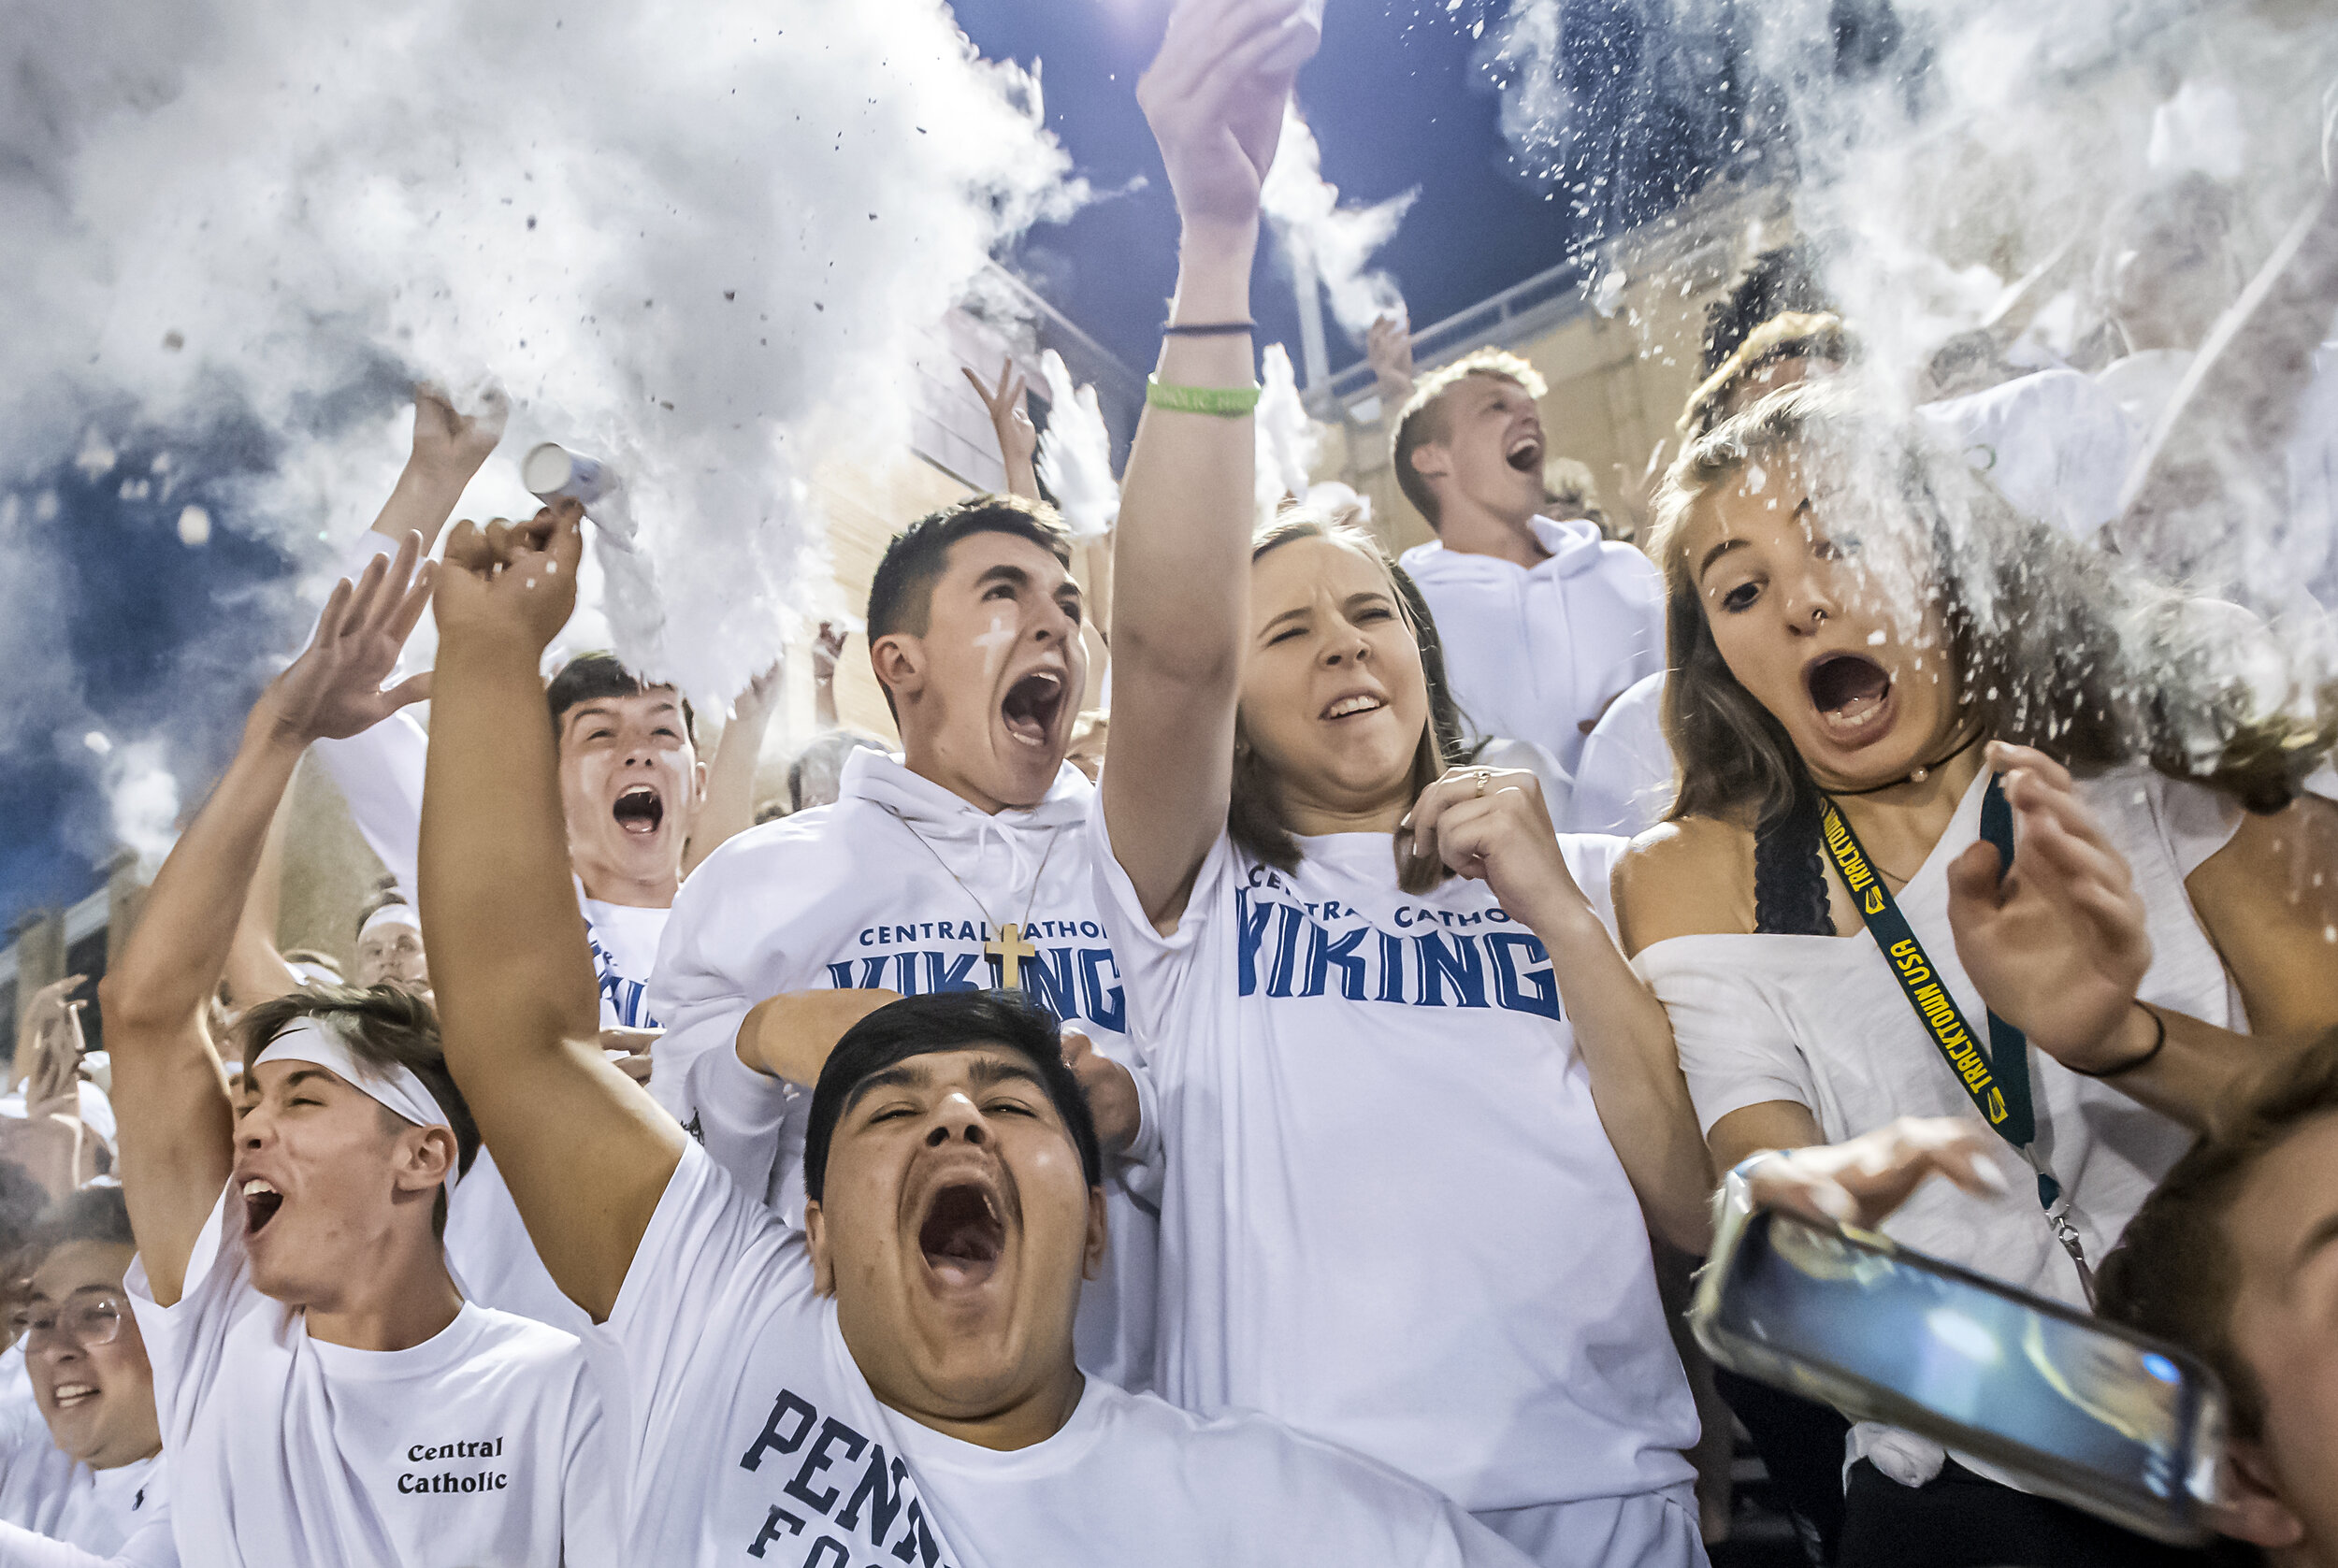  The Central Catholic student section throws baby powder in the air as a girl drops her phone during the opening kickoff against Pine-Richland on Friday, Sept. 27, 2019, at Carnegie Mellon University. Central Catholic beat Pine-Richland, 29-7. 